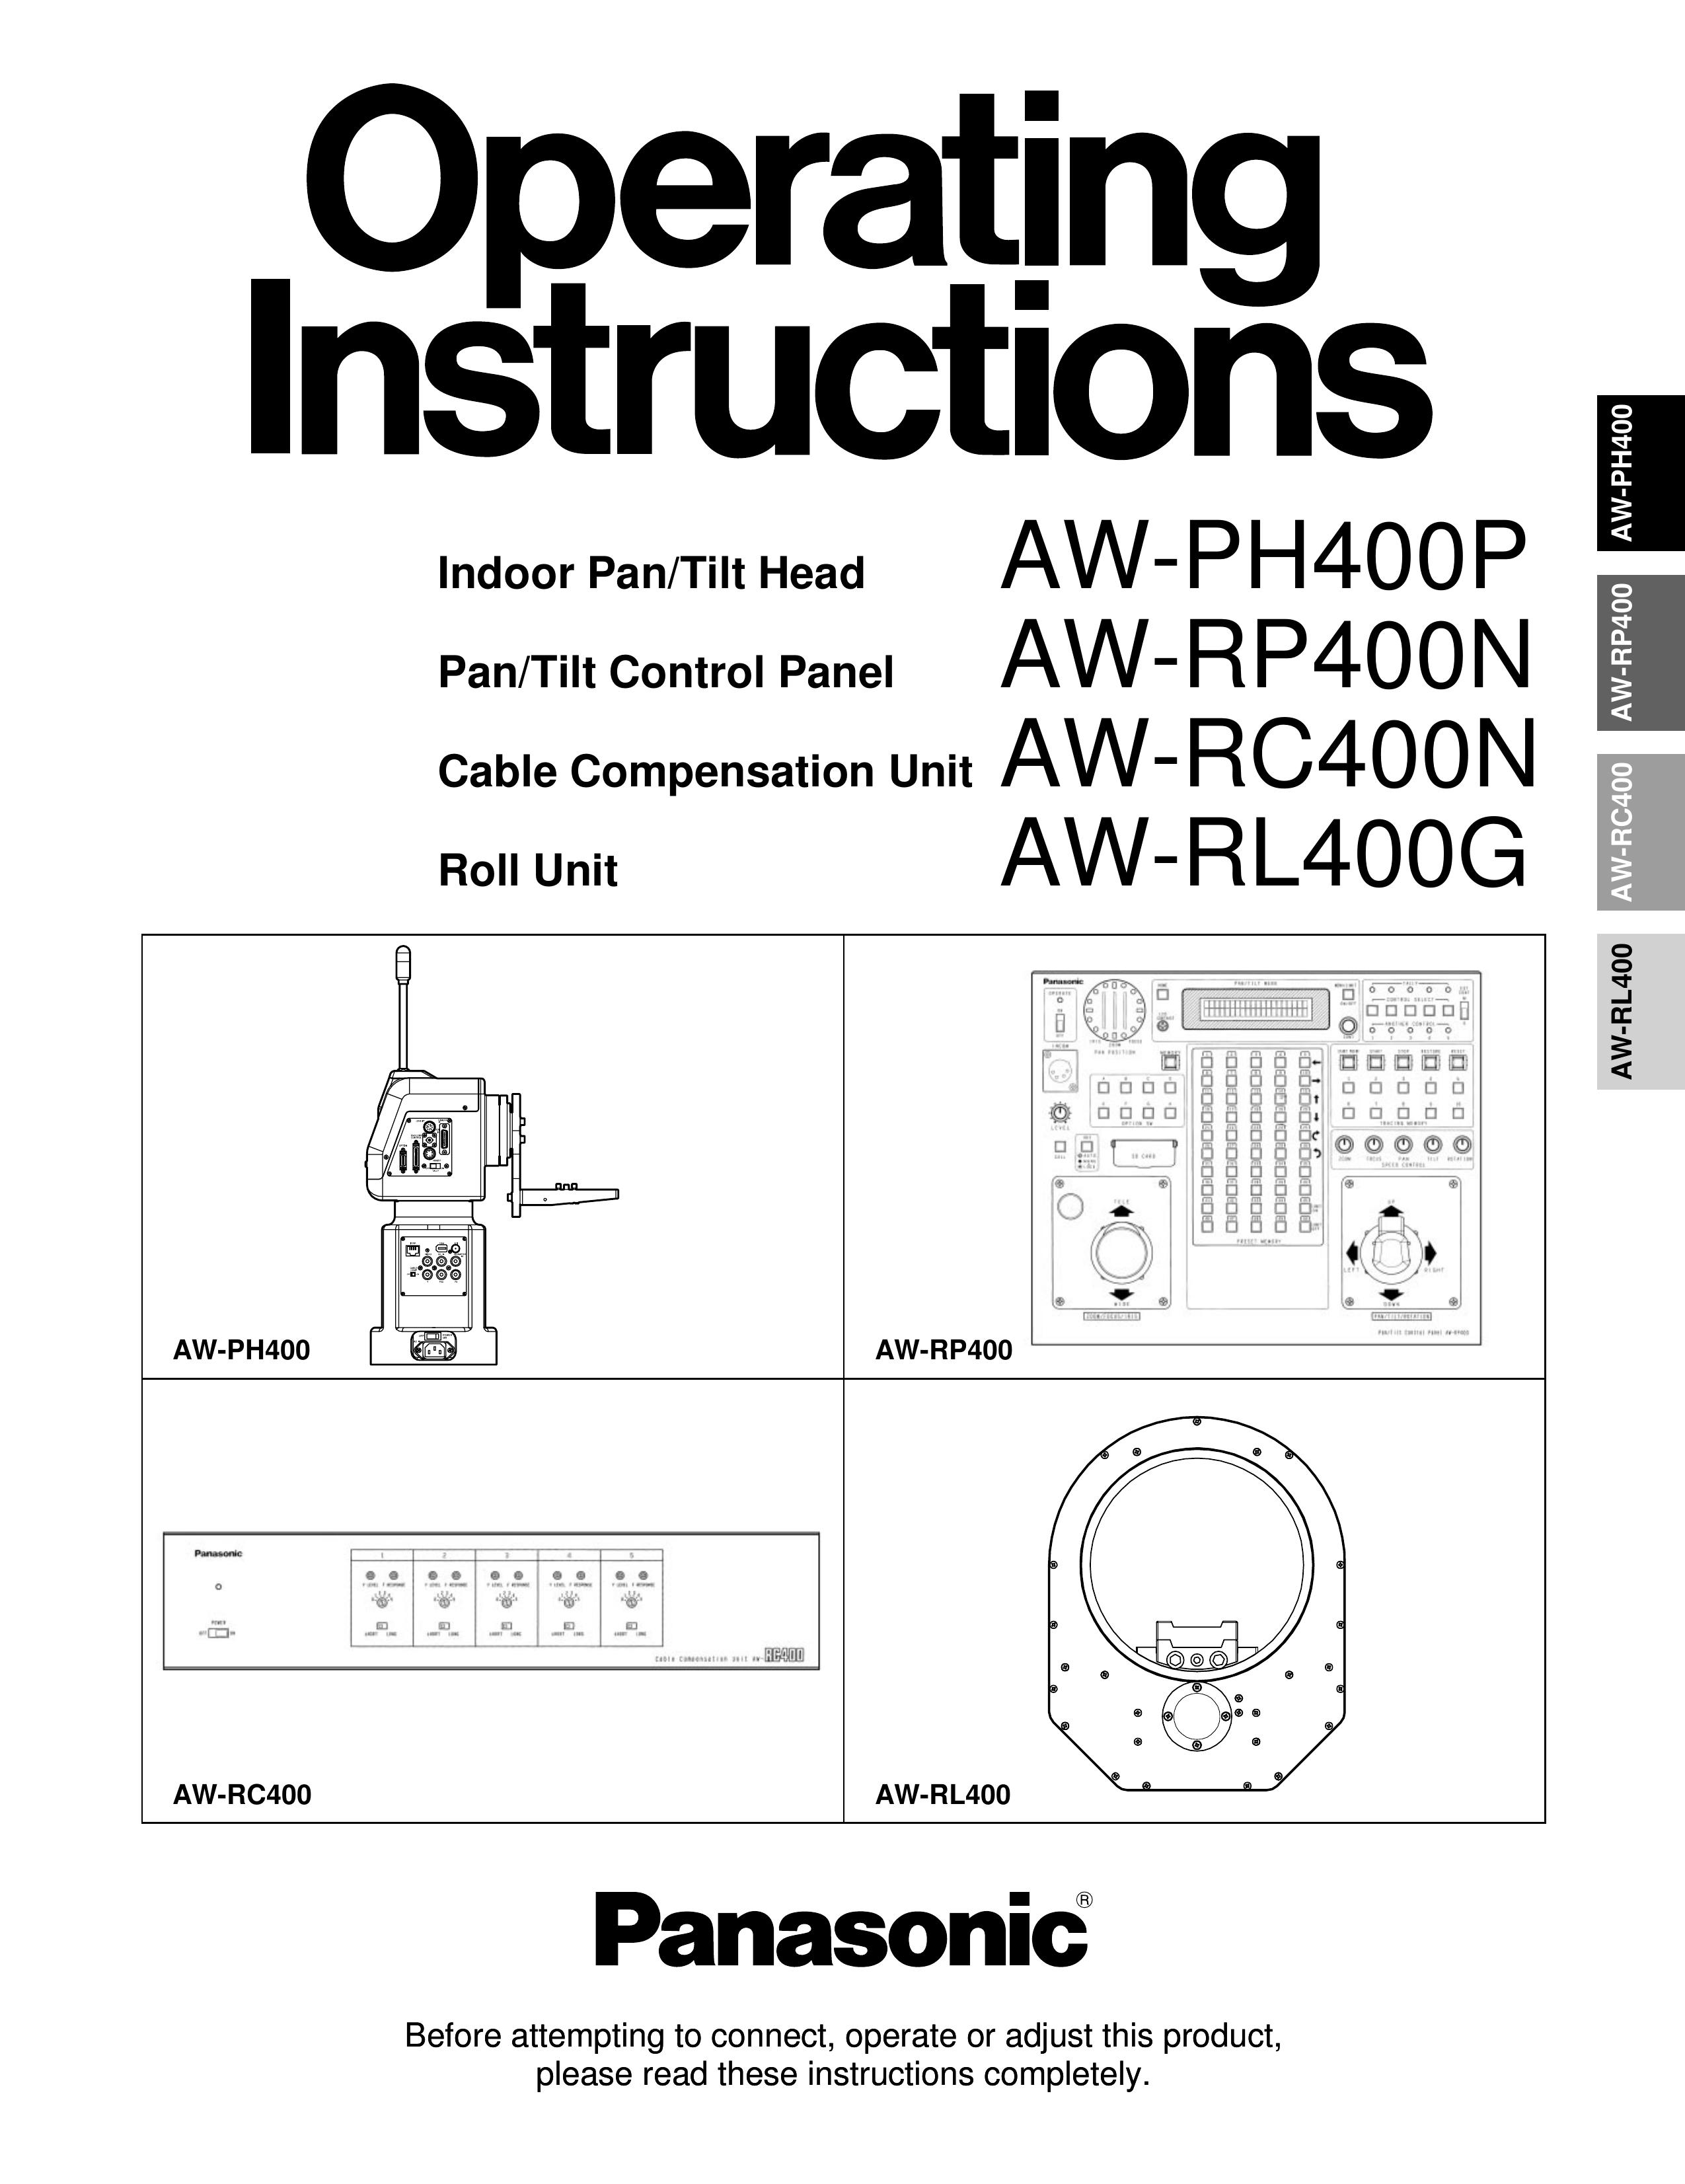 Panasonic AW-RP400 Camcorder Accessories User Manual